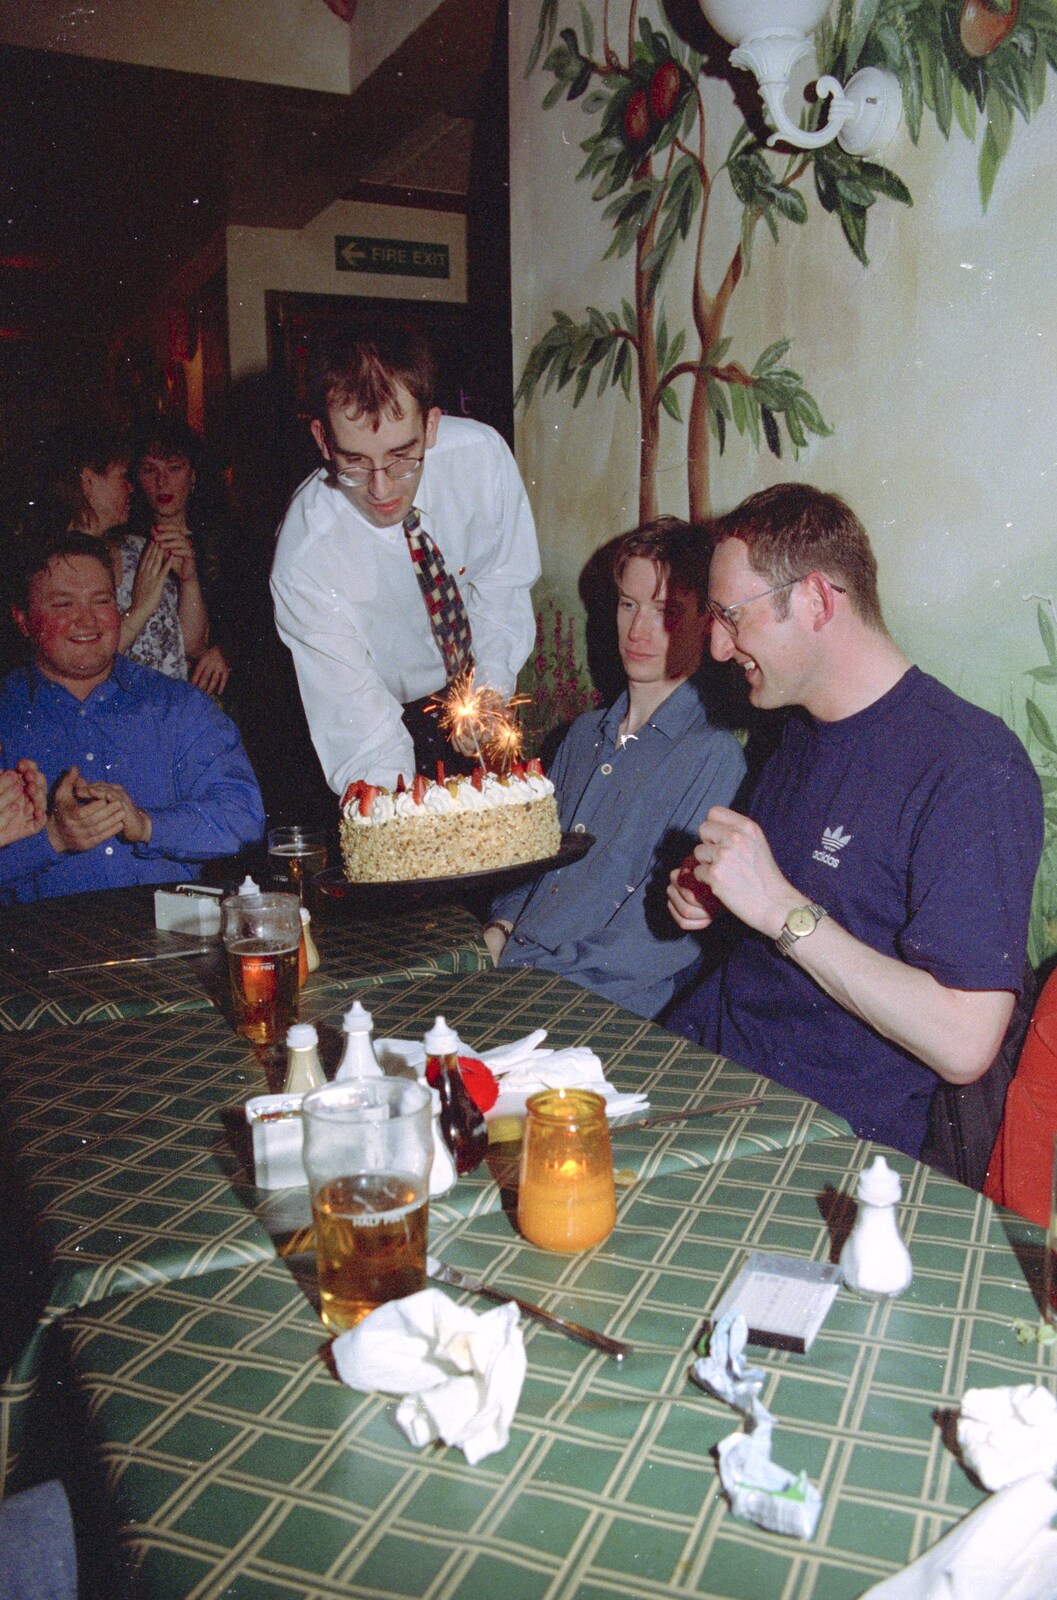 An on-fire birthday cake turns up for Dougie from Dougie's Birthday and Adrian Leaves CISU, Ipswich, Suffolk - 29th June 1997